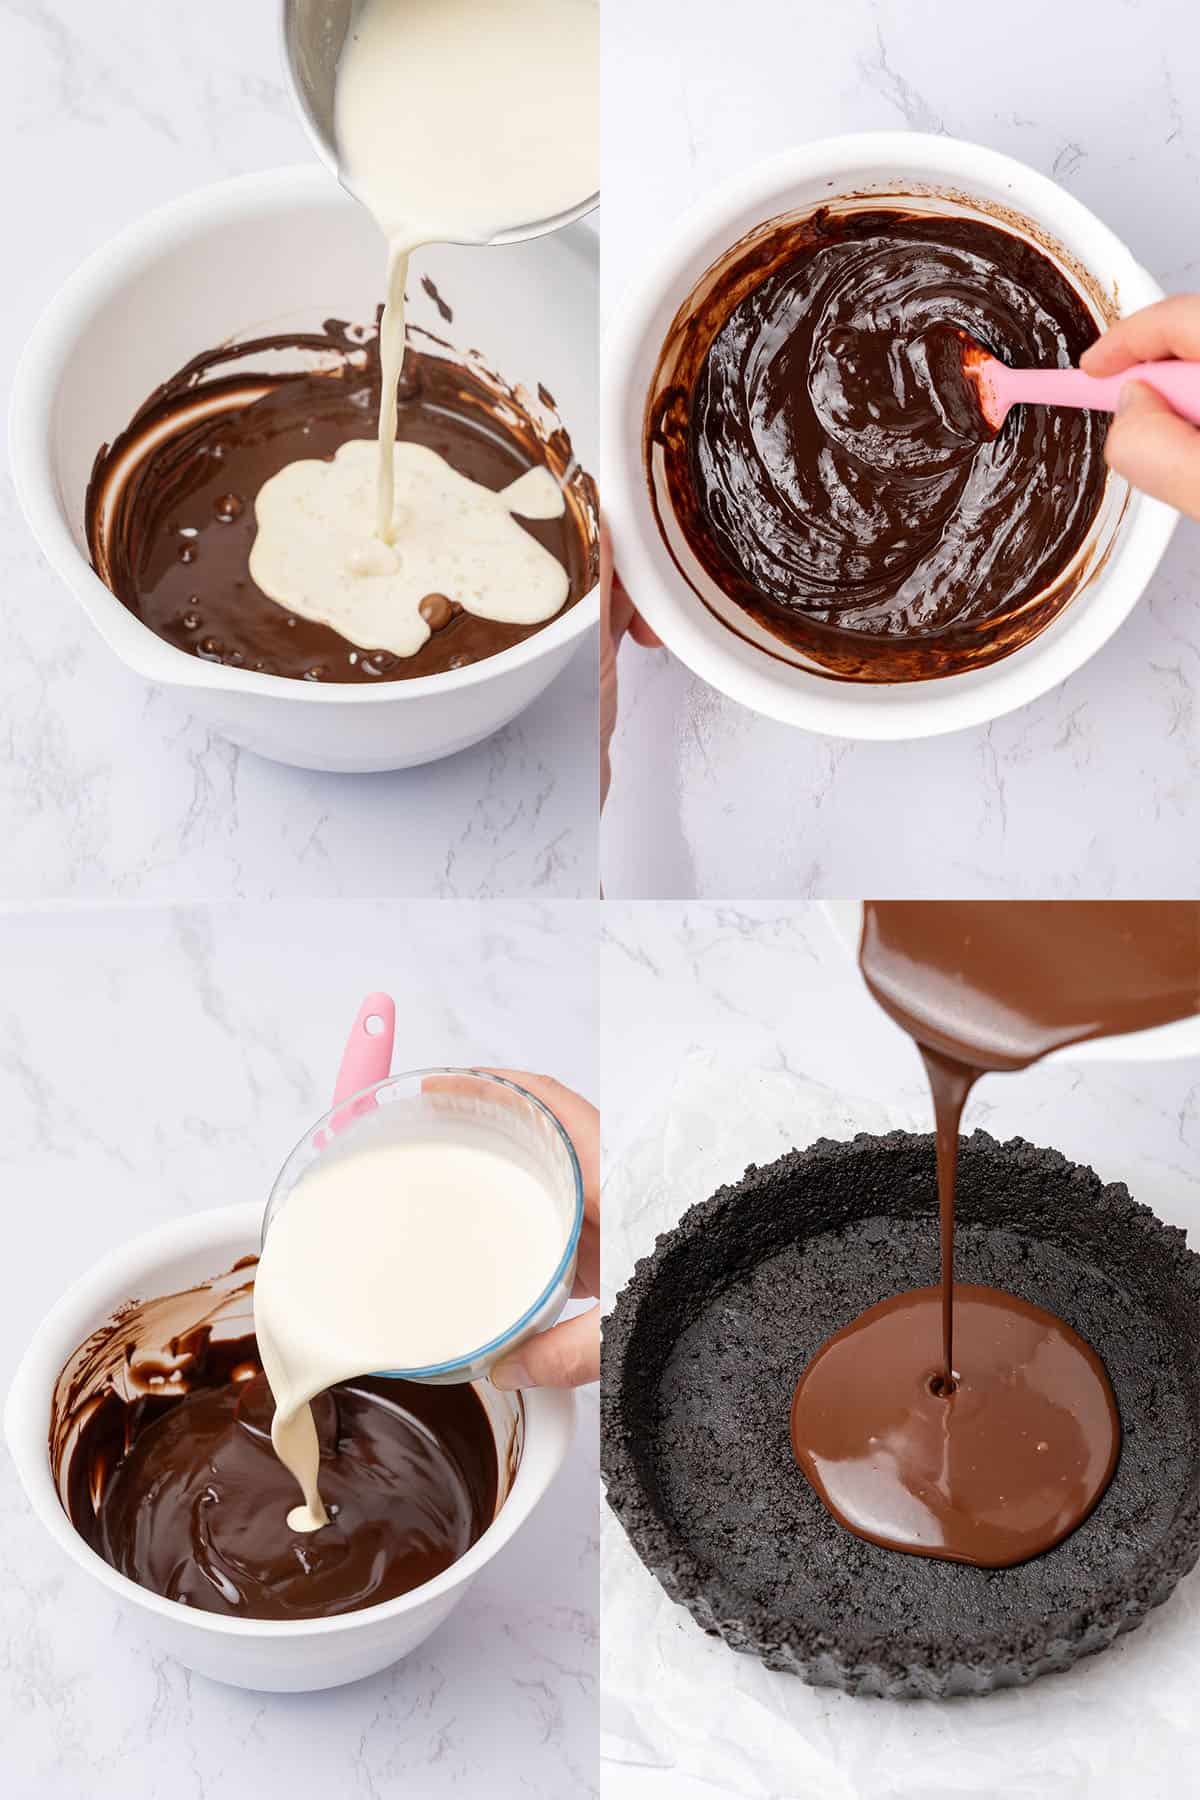 Process of making chocolate filling.